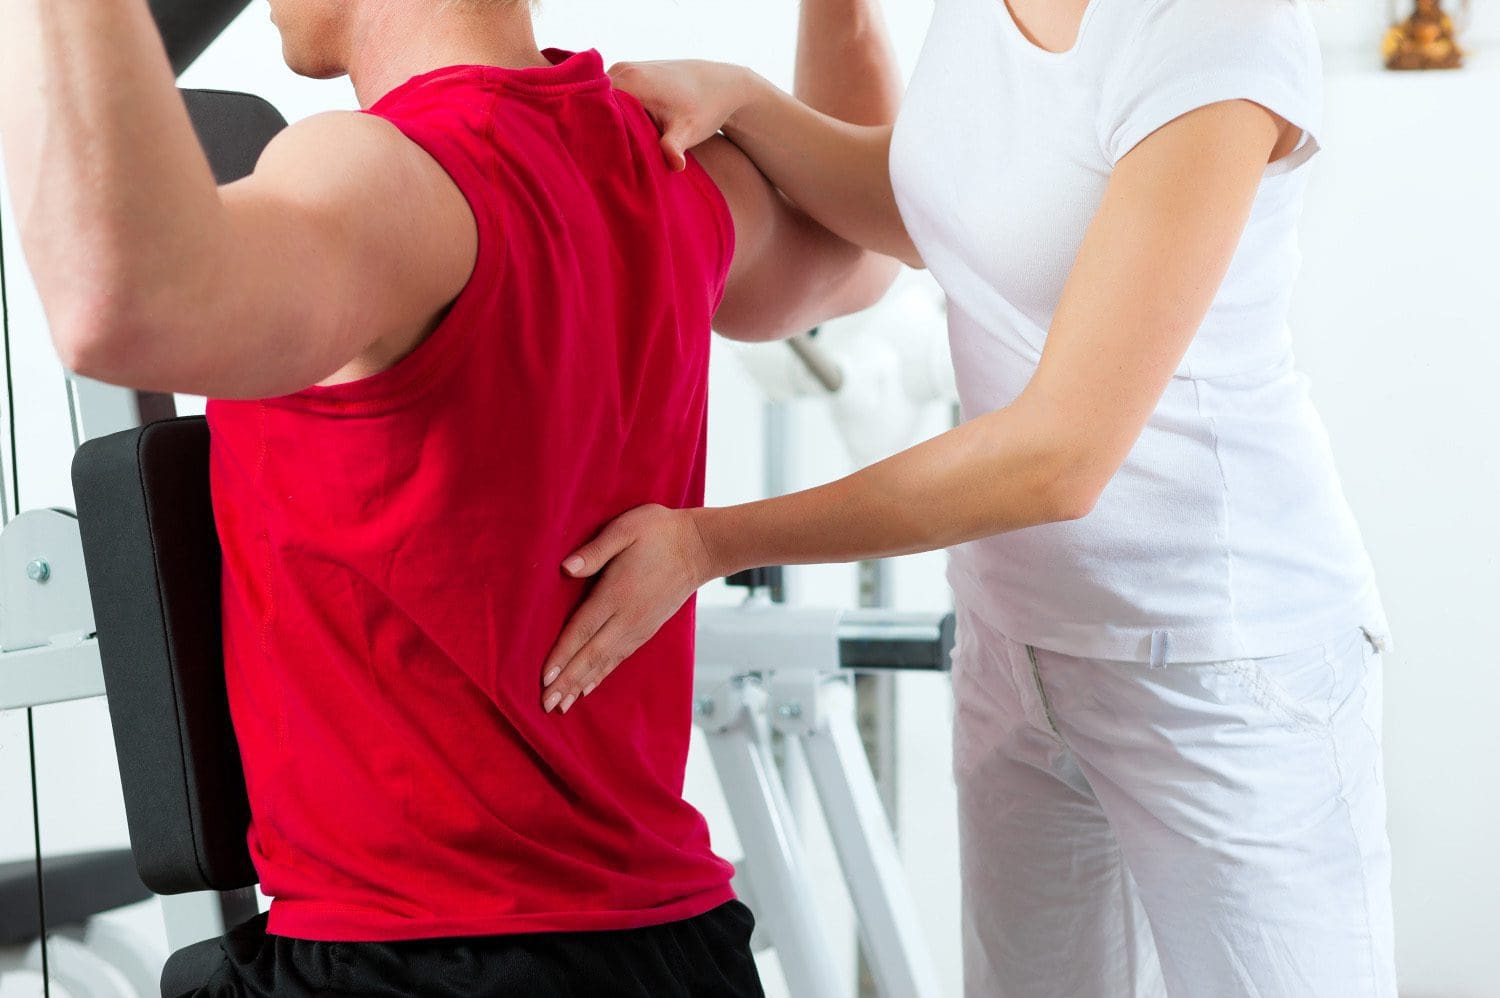 11860 Vista Del Sol, Ste. 128 Sarcopenia Muscle Mass Loss With Chronic Back Pain